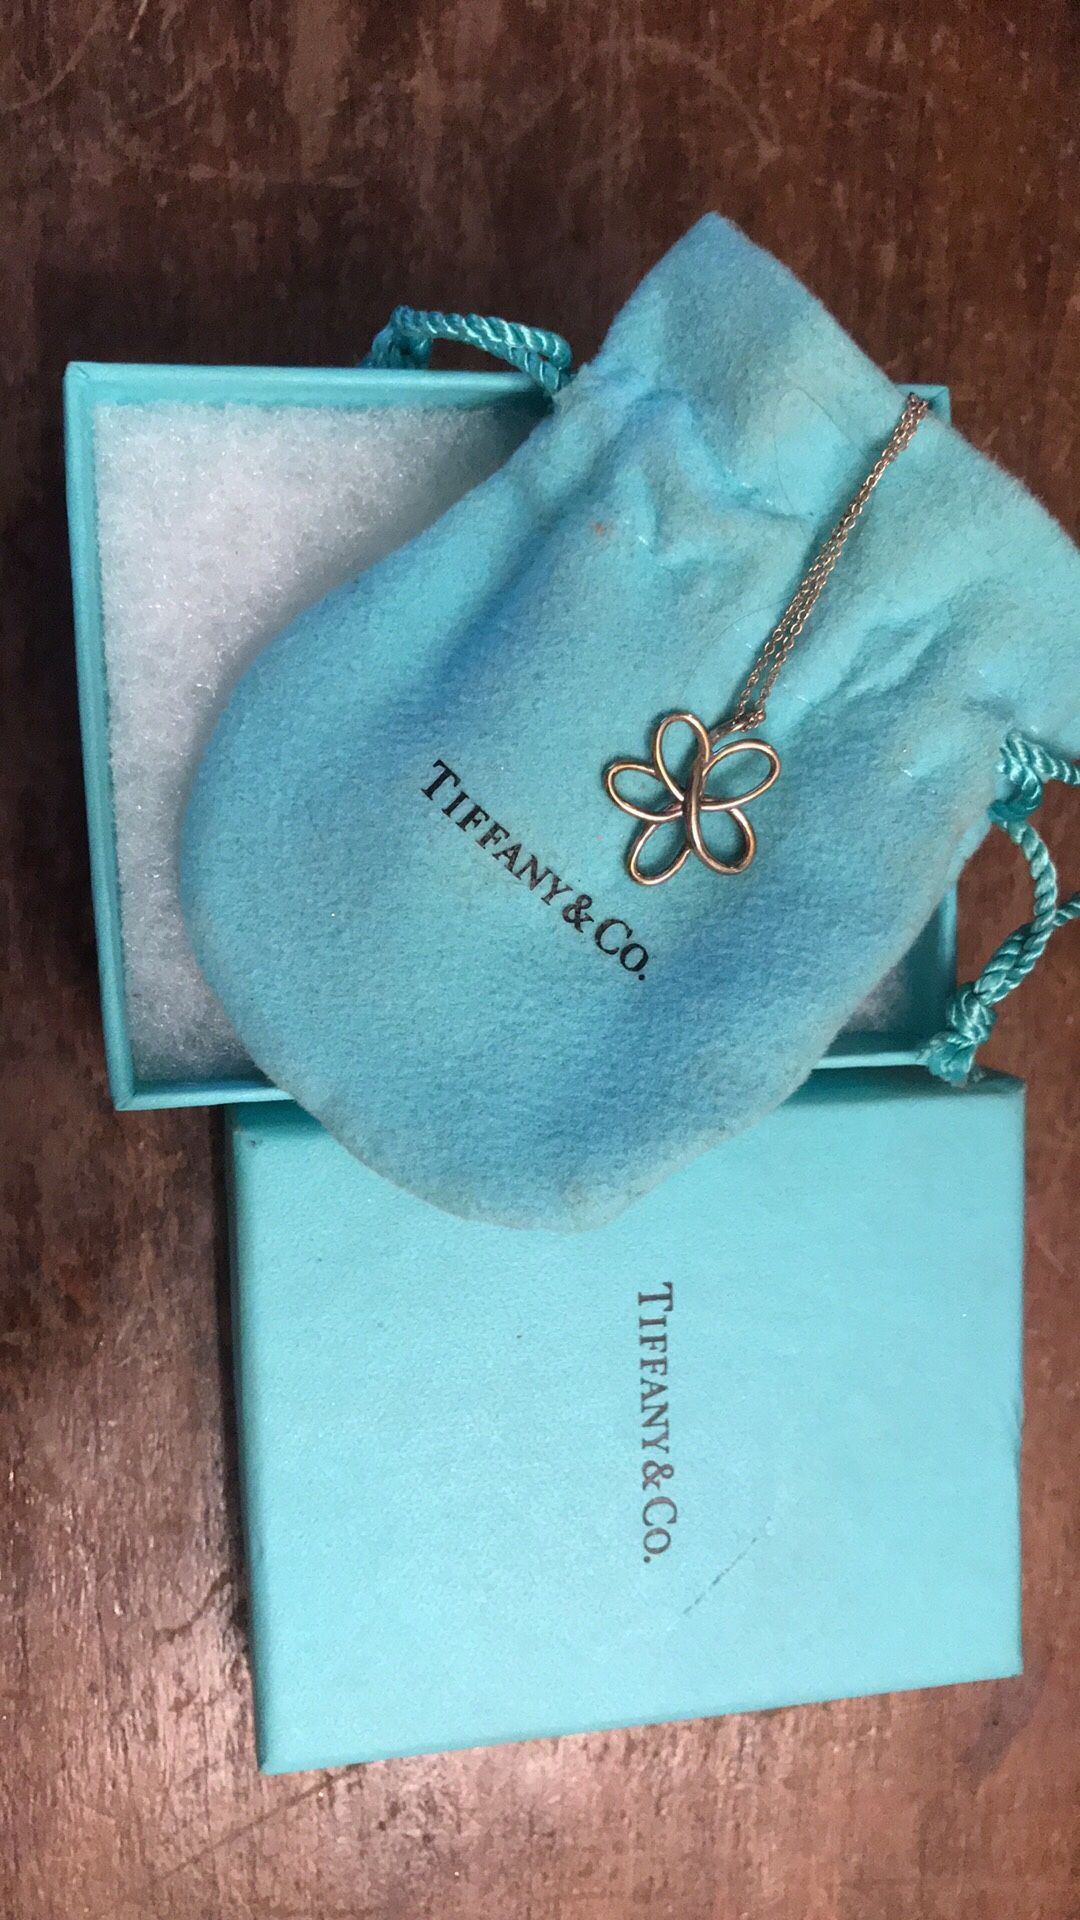 Tiffany & Co. Sterling Silver Flower necklace